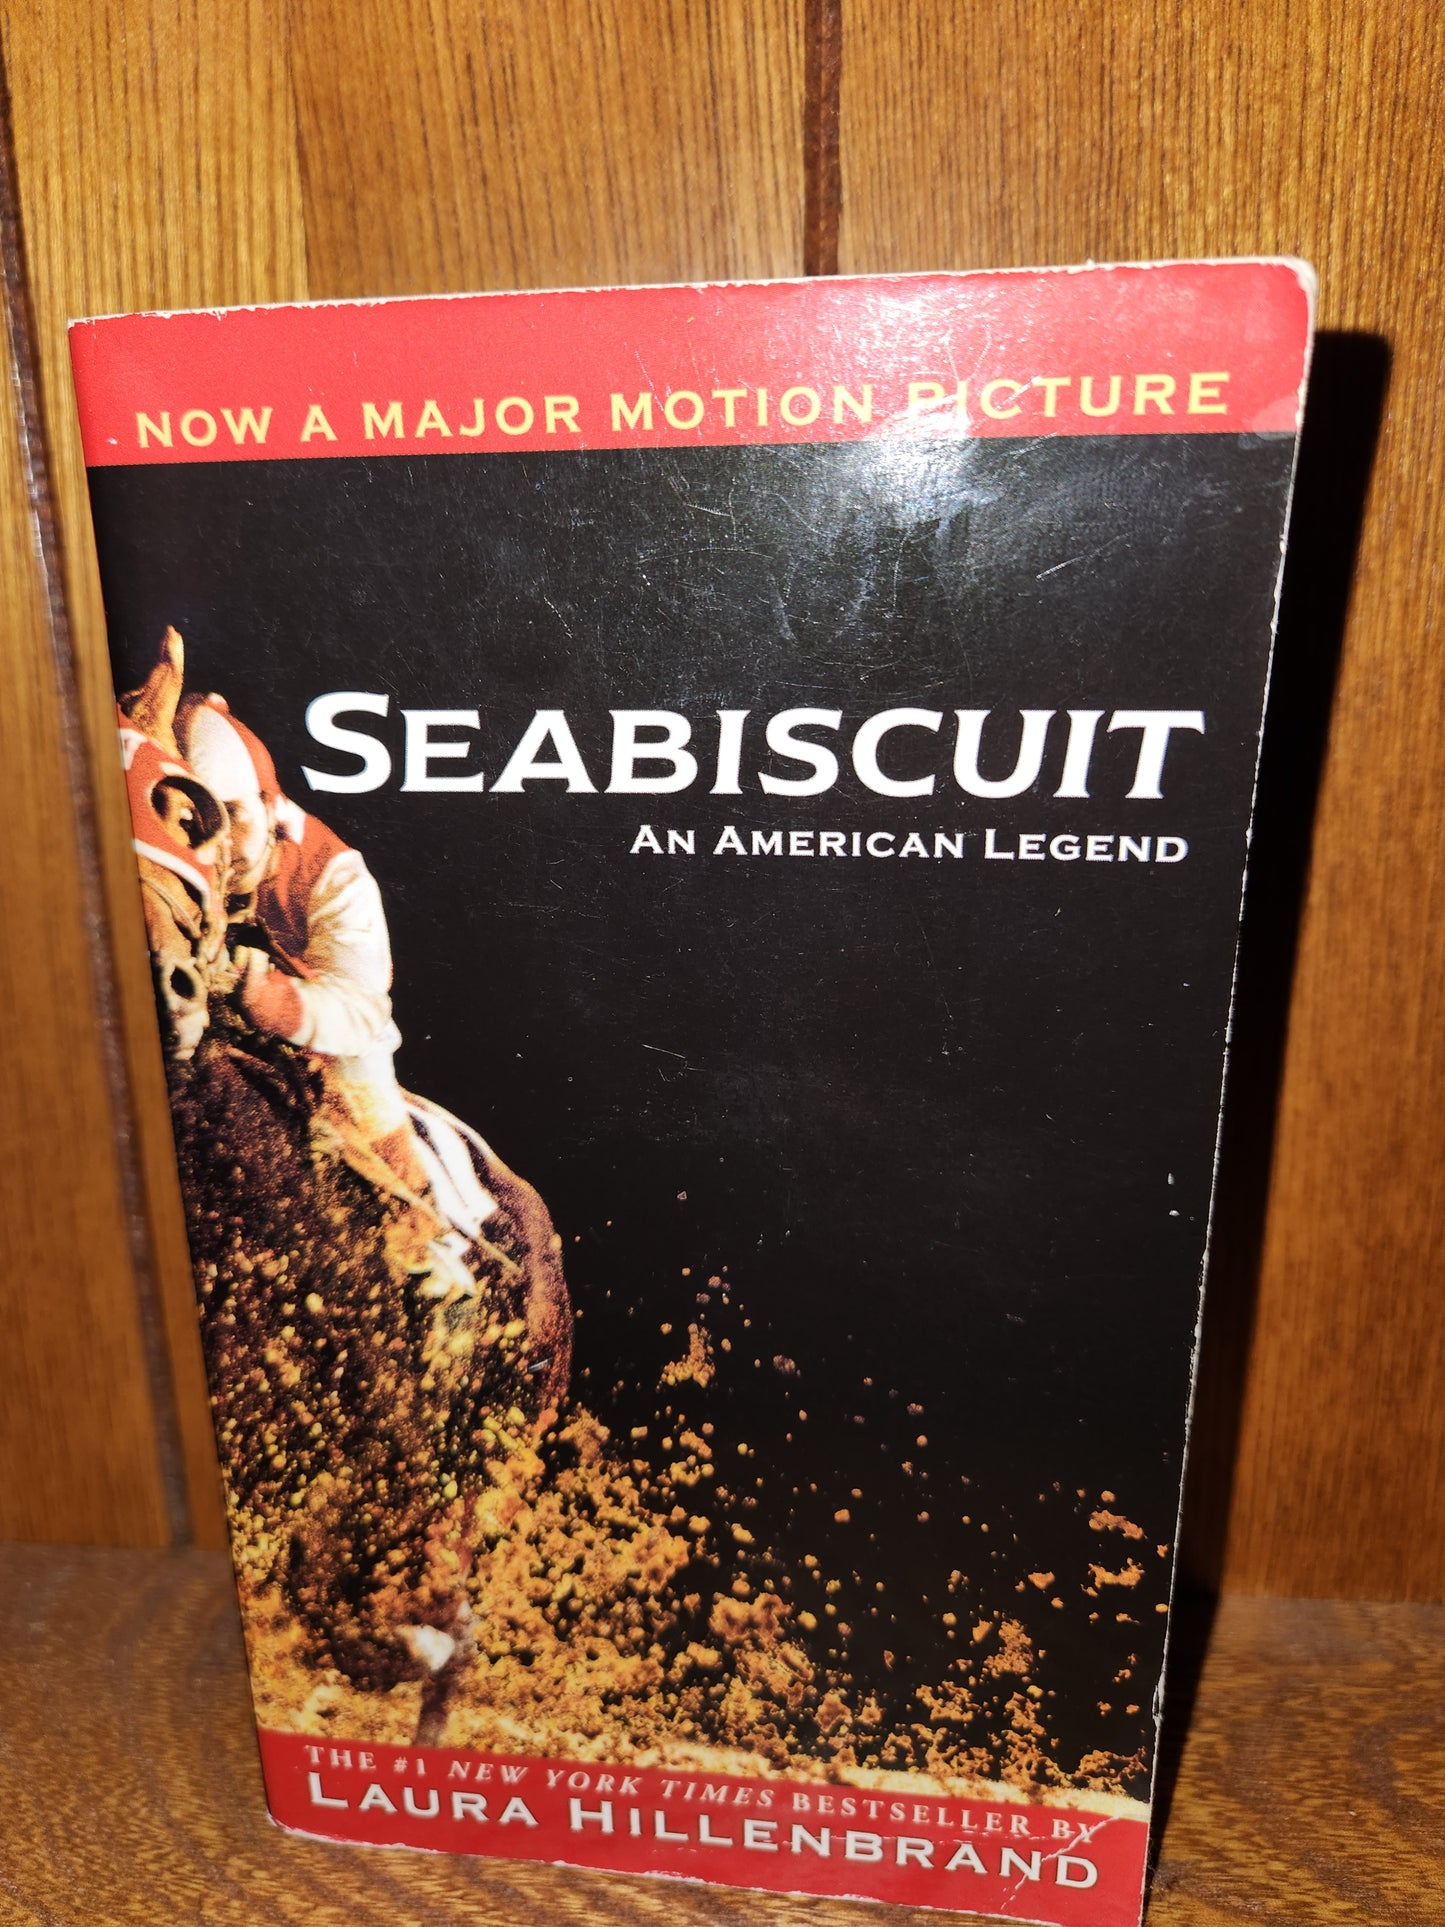 "Seabiscuit: An American Legend" by Laura Hillenbrand